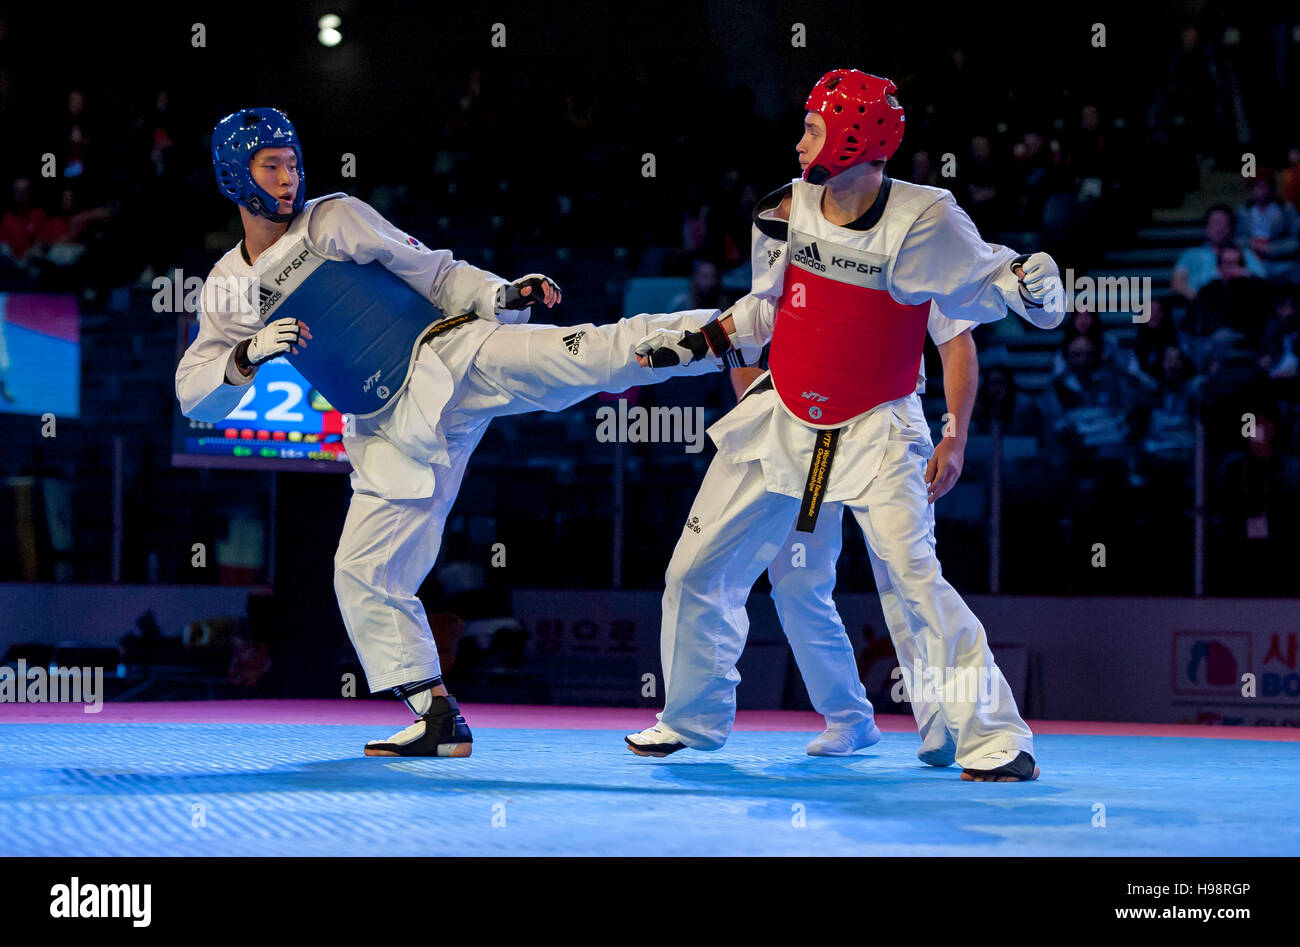 Burnaby, Canada. 19 November, 2016. WTF World Taekwondo Junior Championships Seung-Min Lee (KOR) and Sergey KArnuta (RUS) red compete in the final of male 73kg won by Lee. Alamy Live News/Peter Llewellyn Stock Photo